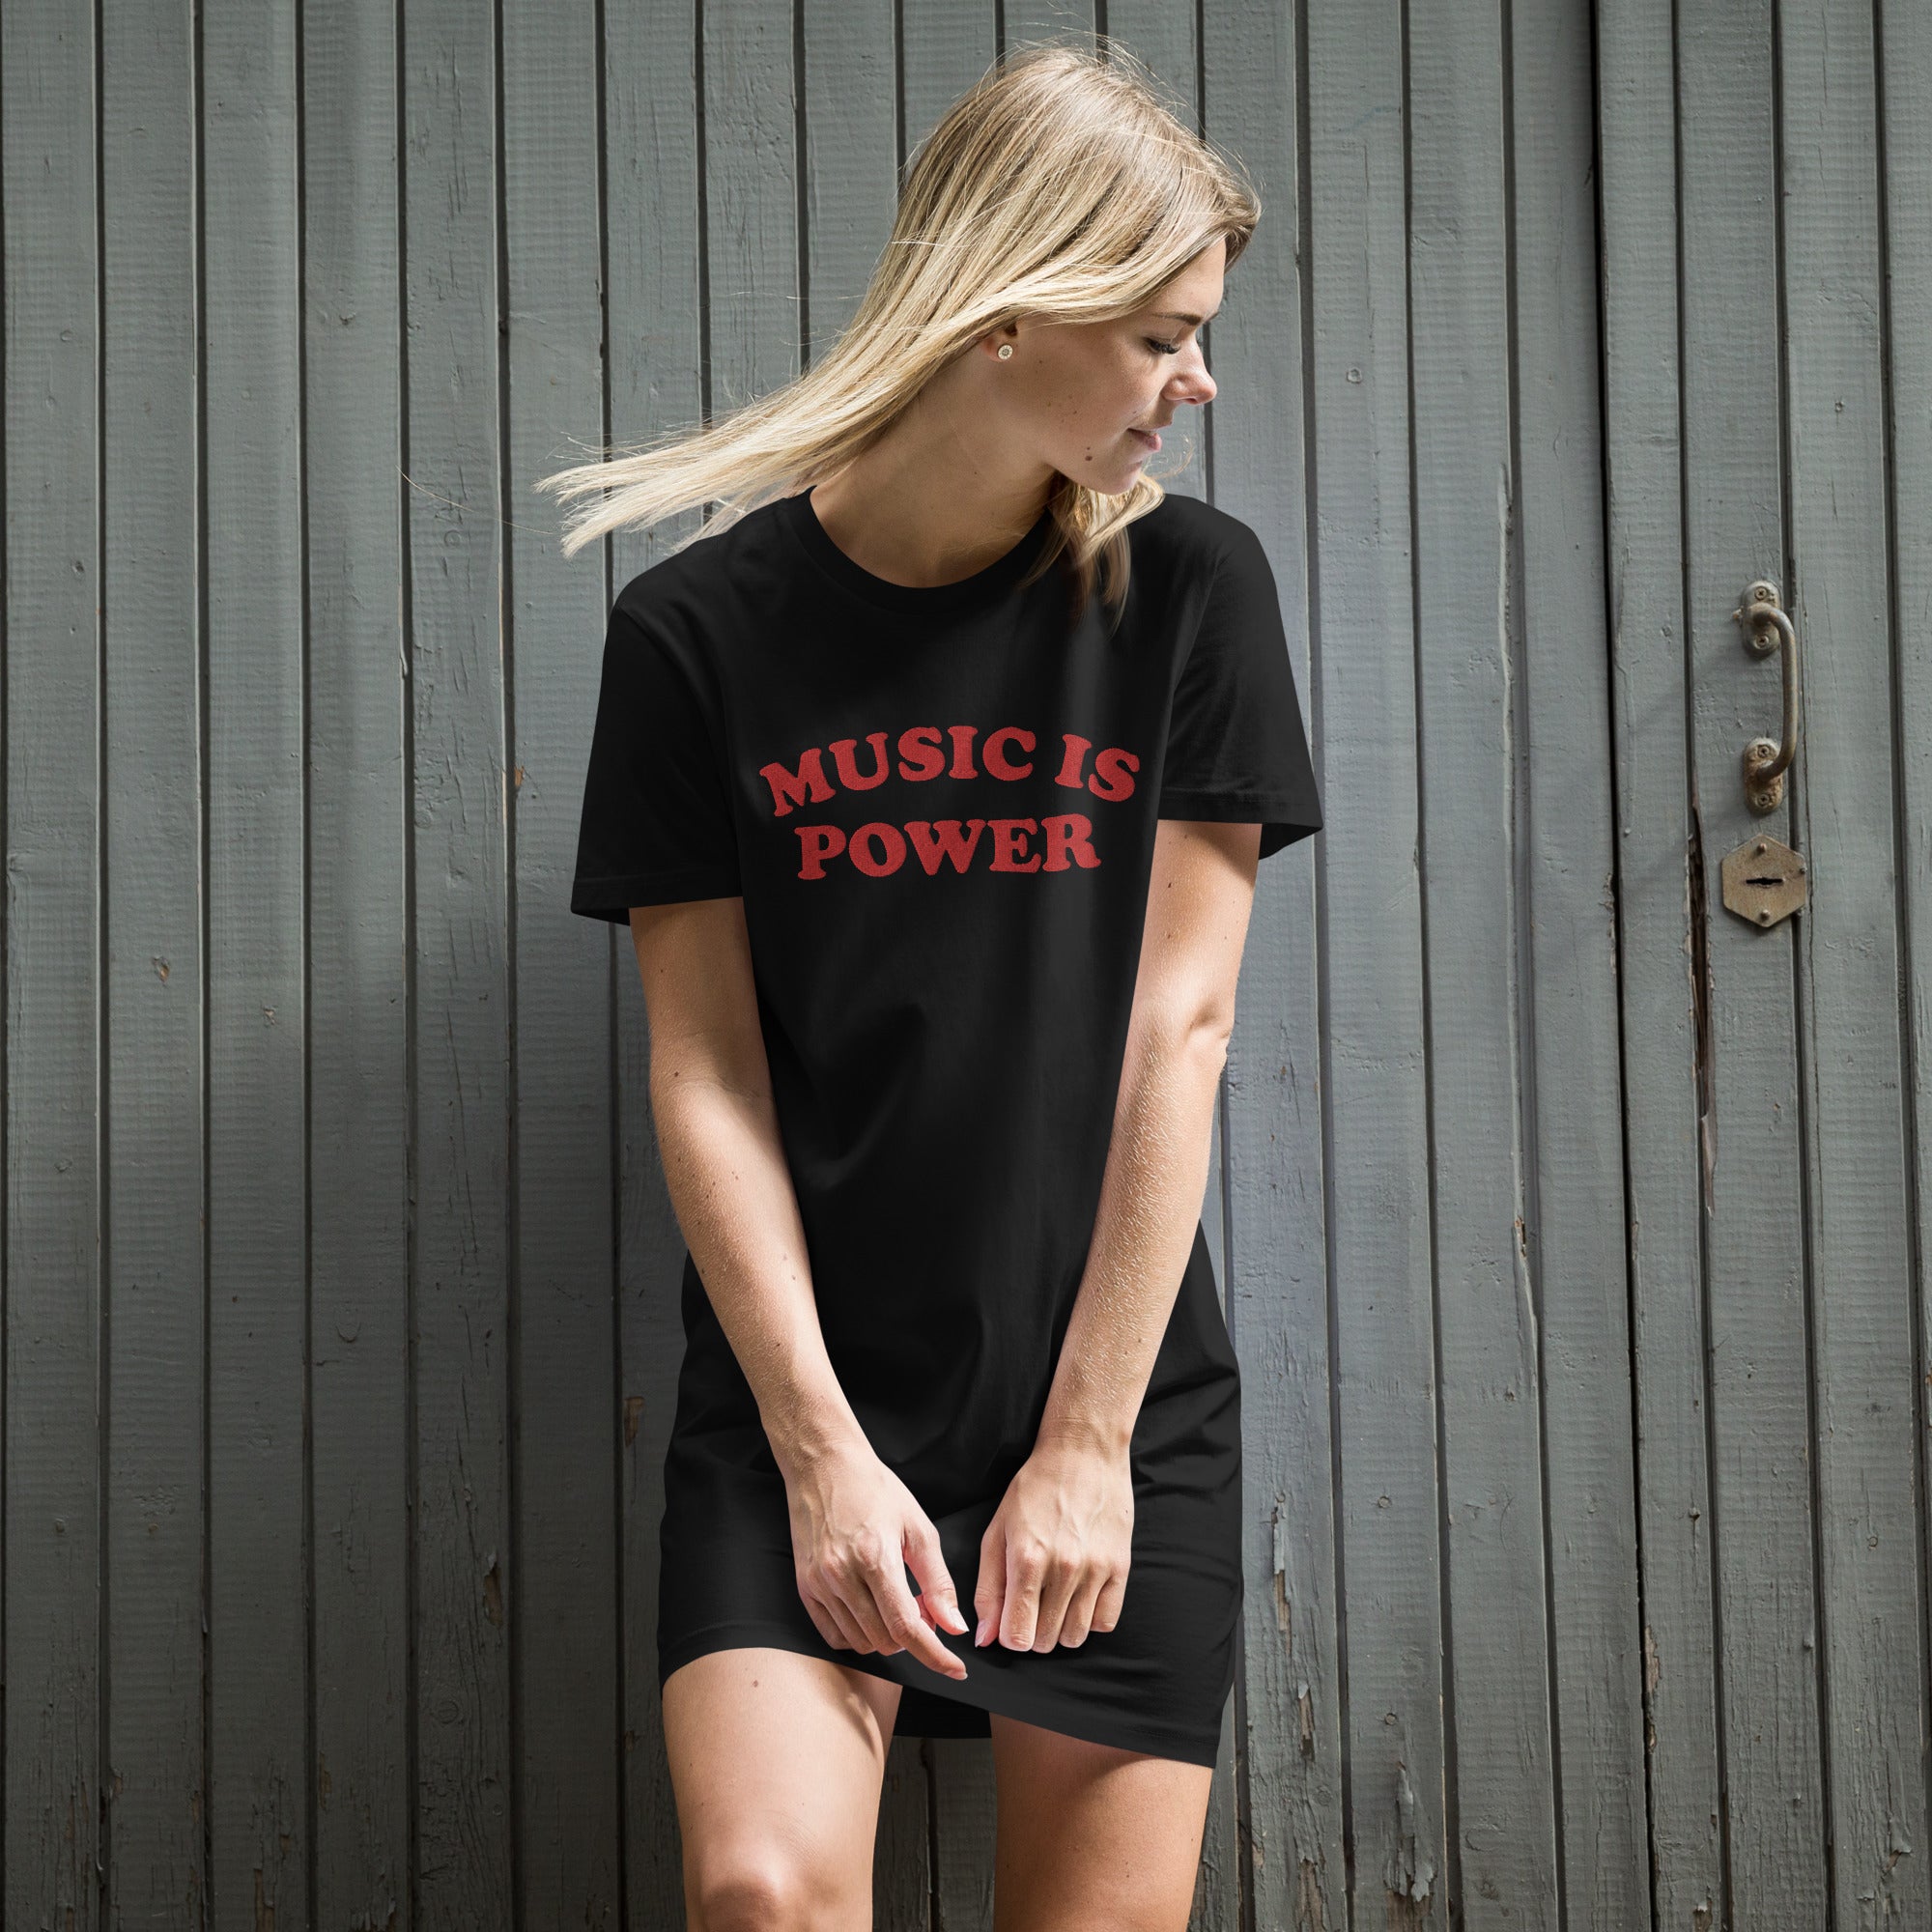 MUSIC IS POWER Embroidered organic cotton t-shirt dress